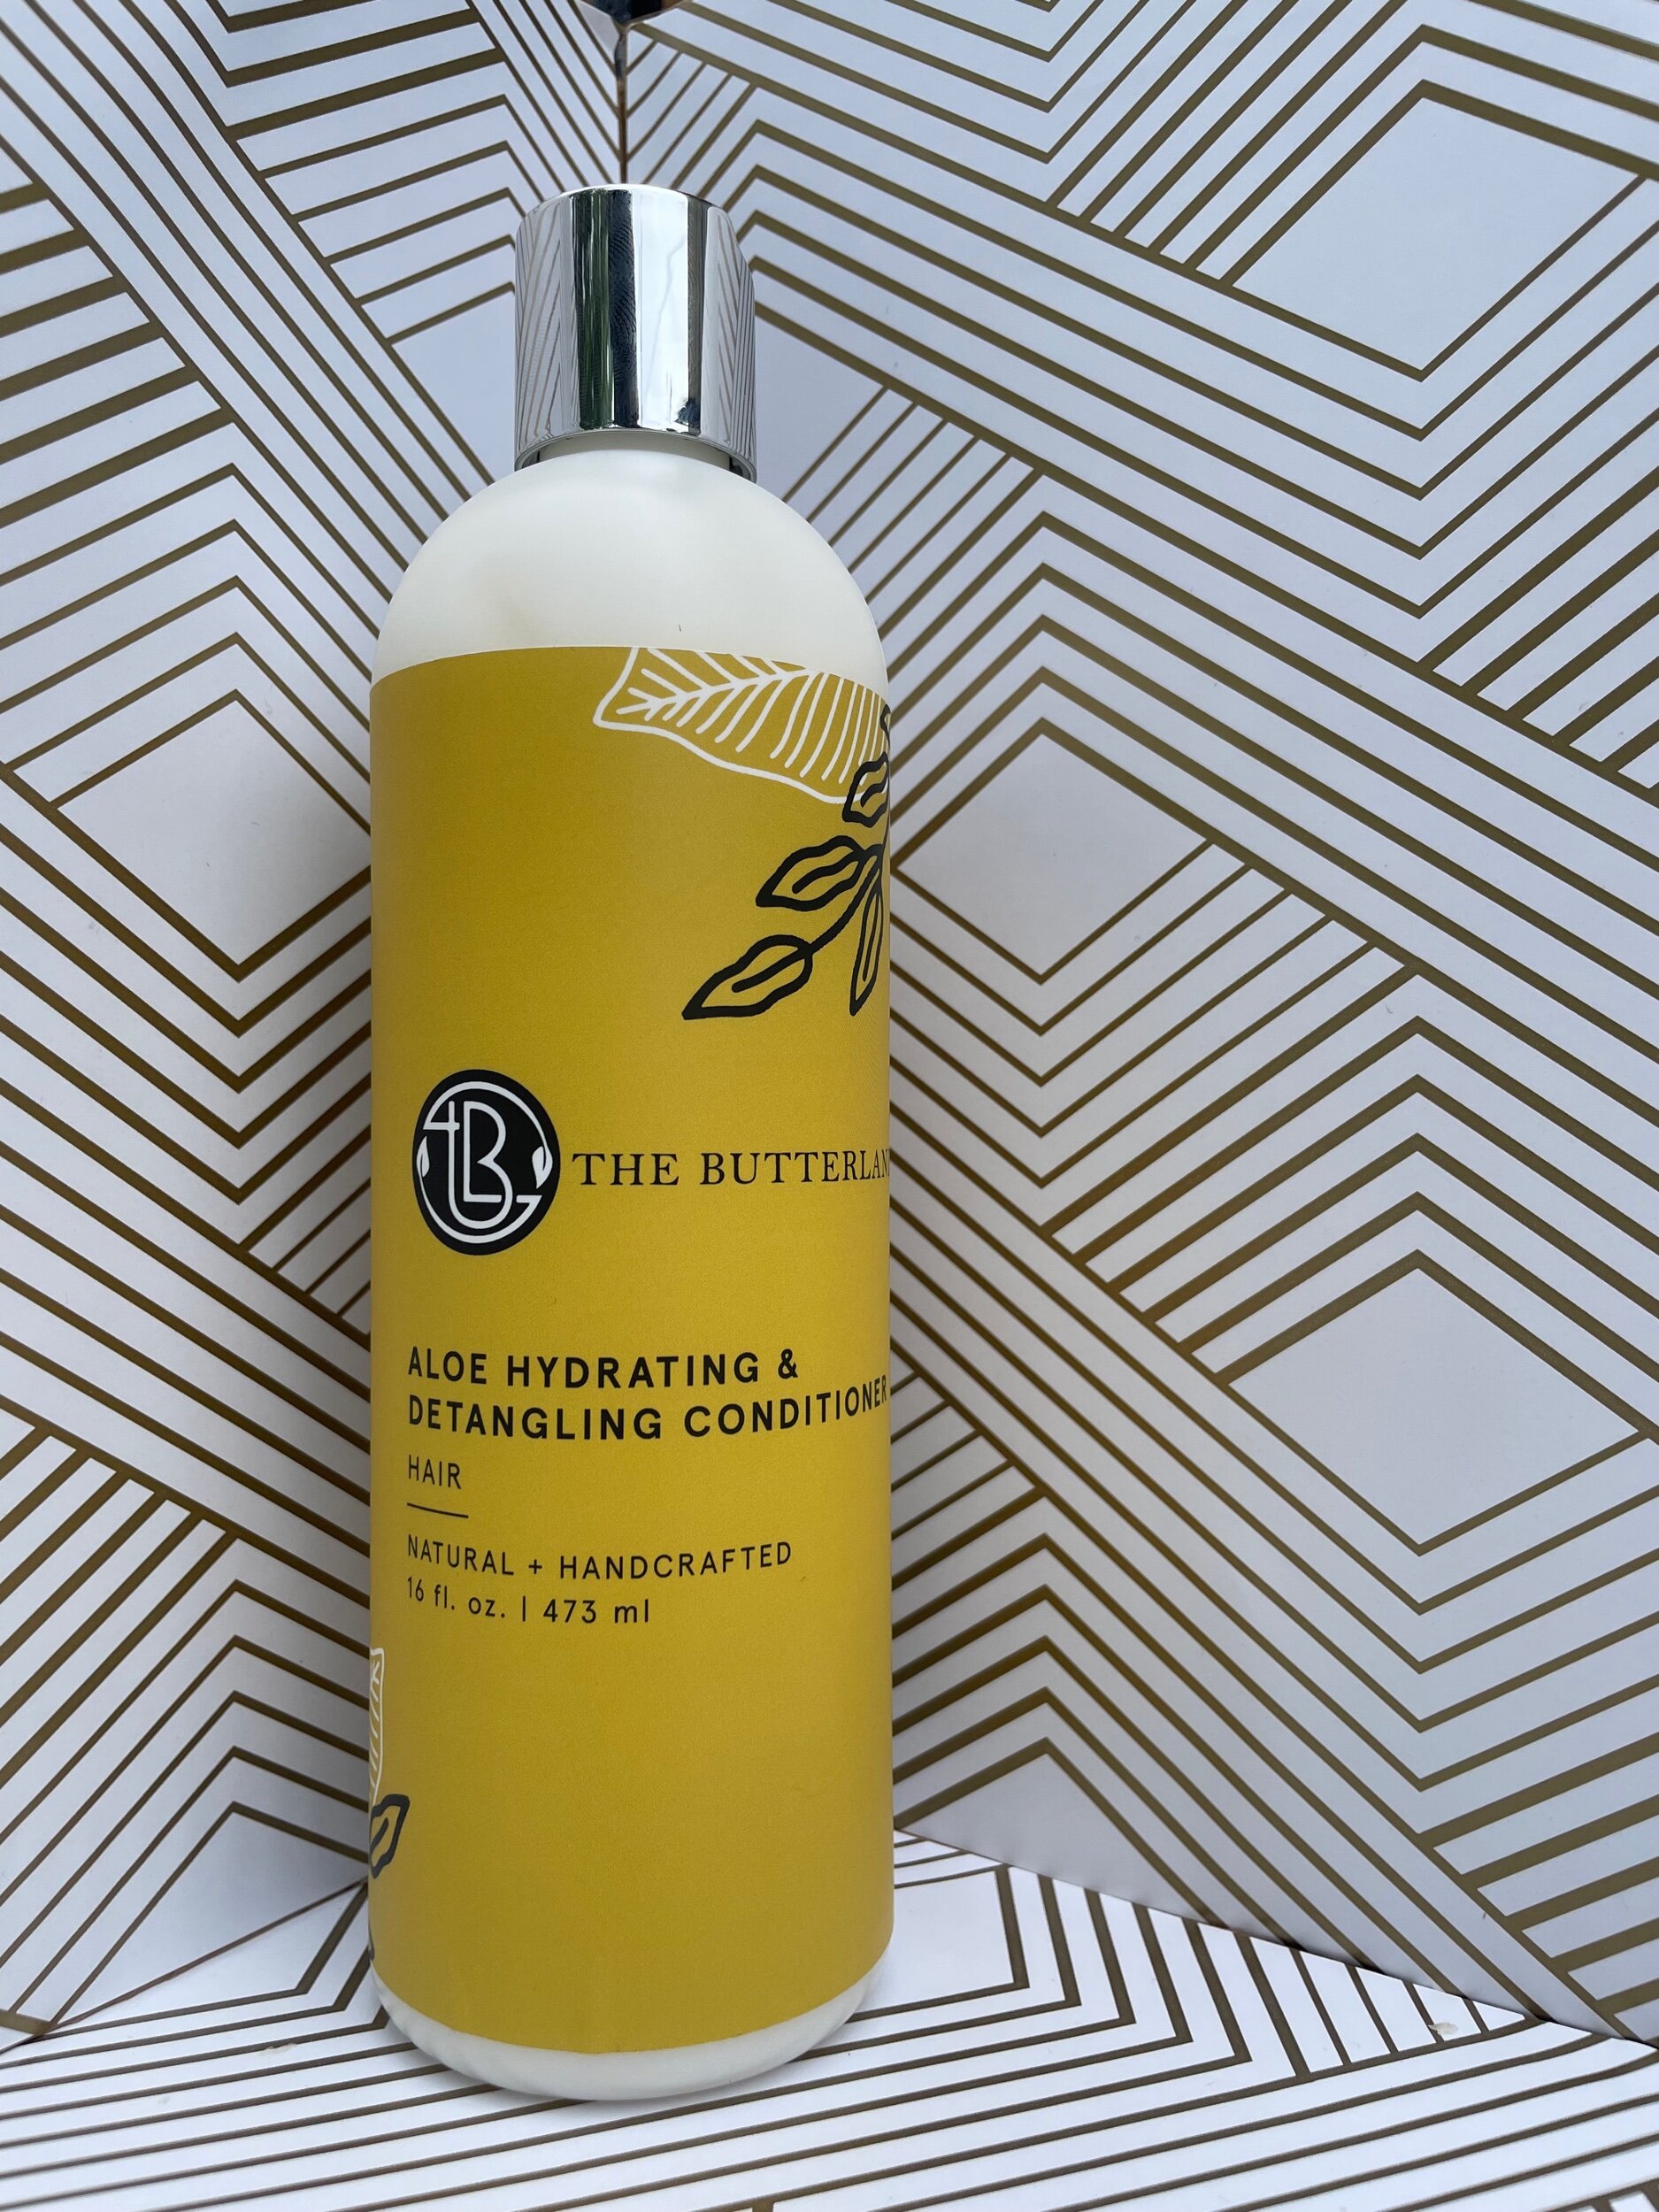 Rice Water and Aloe Hydrating Conditioner – WonderfullyMade